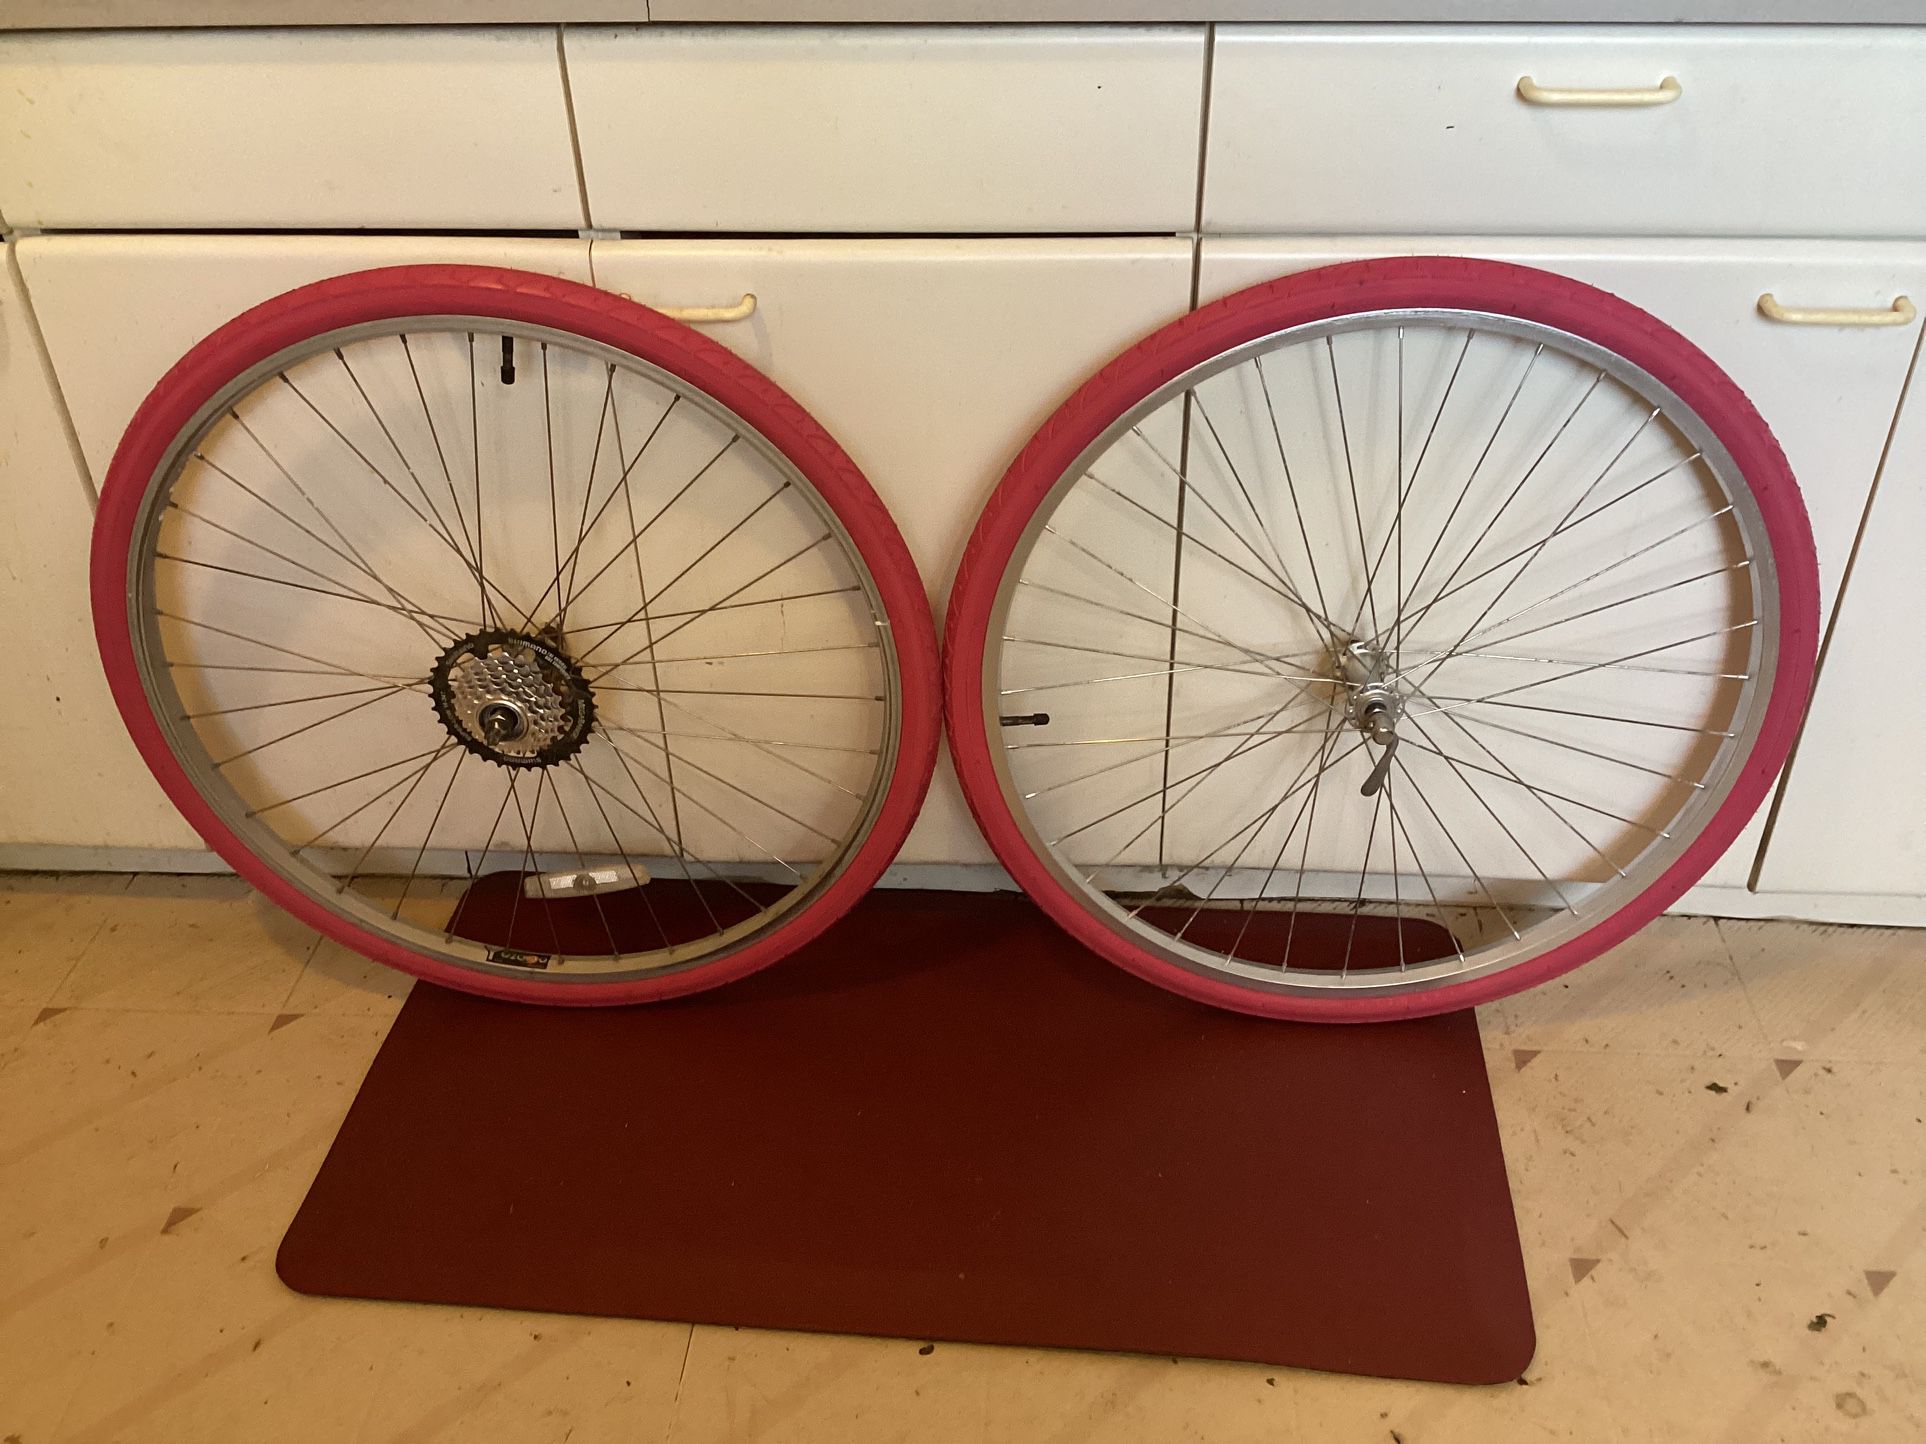 700X38C Road Bike Wheels 7 Speed Excellent Condition Tires And Tubes News $65 Firm 